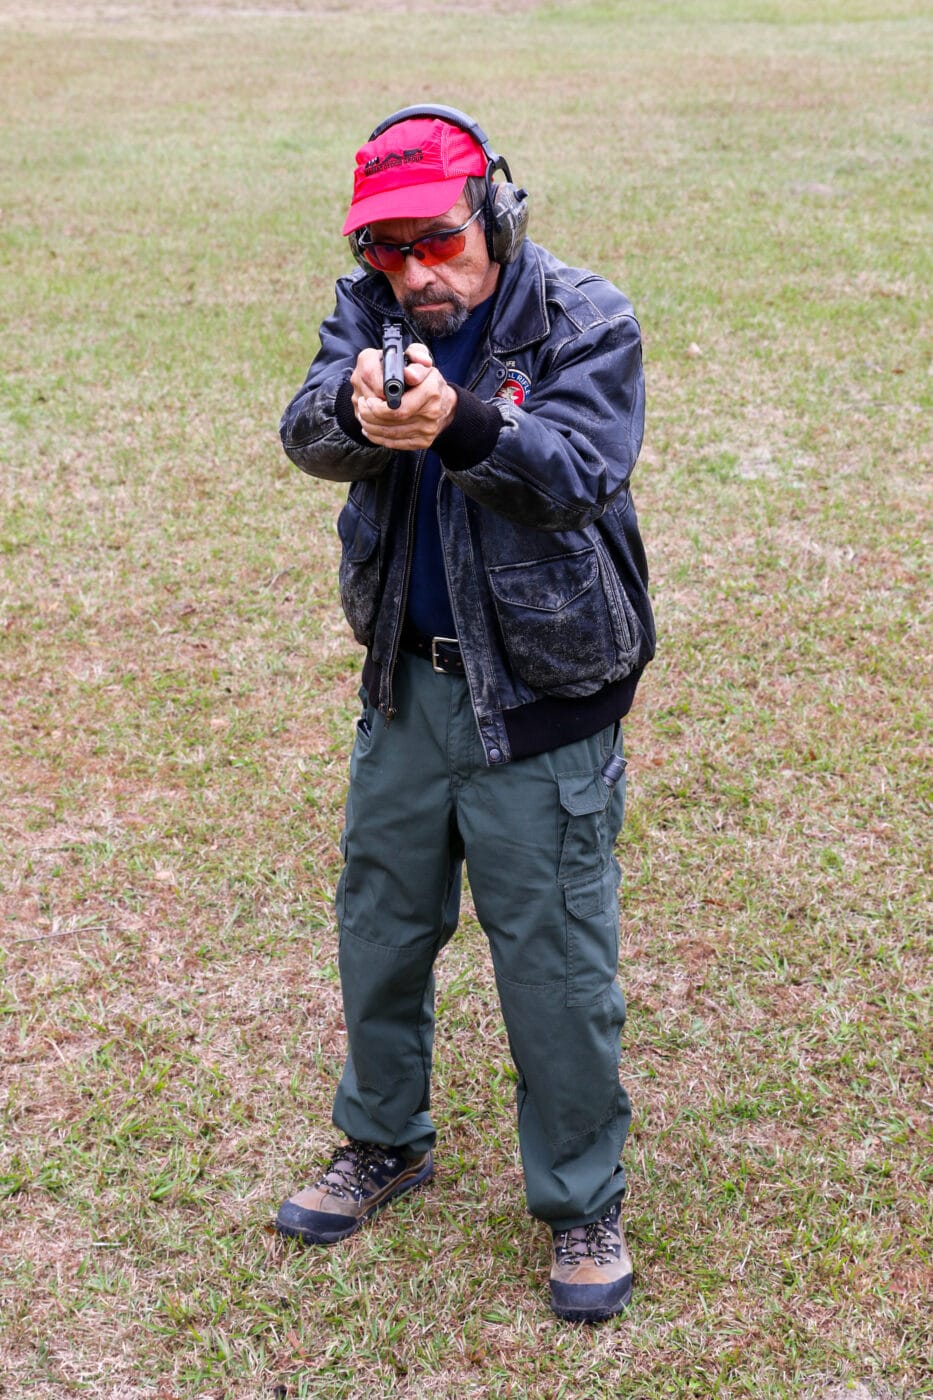 Massad Ayoob shooting a 1911 in a Weaver stance